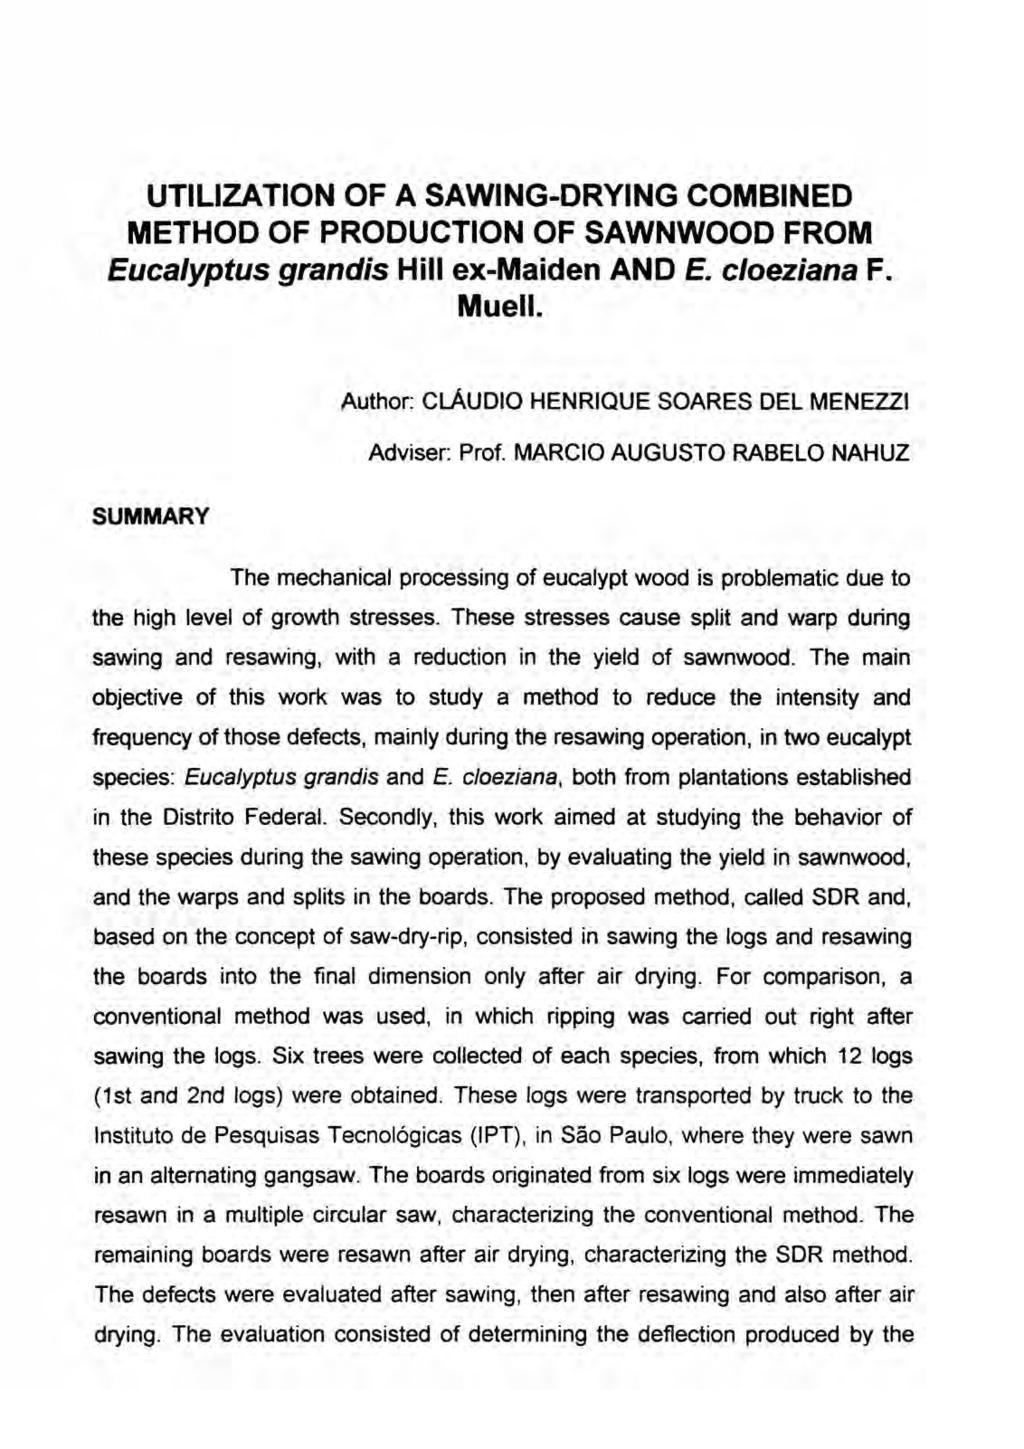 UTILIZATION OF A SAWING-DRYING COMBINED METHOO OF PROOUCTION OF SAWNWOOO FROM Eucalyptus grandis Hill ex-maiden ANO E. c/oeziana F. Muell. Author: CLAUDIO HENRIQUE SOARES DEL MENEZZI Adviser: Prof.